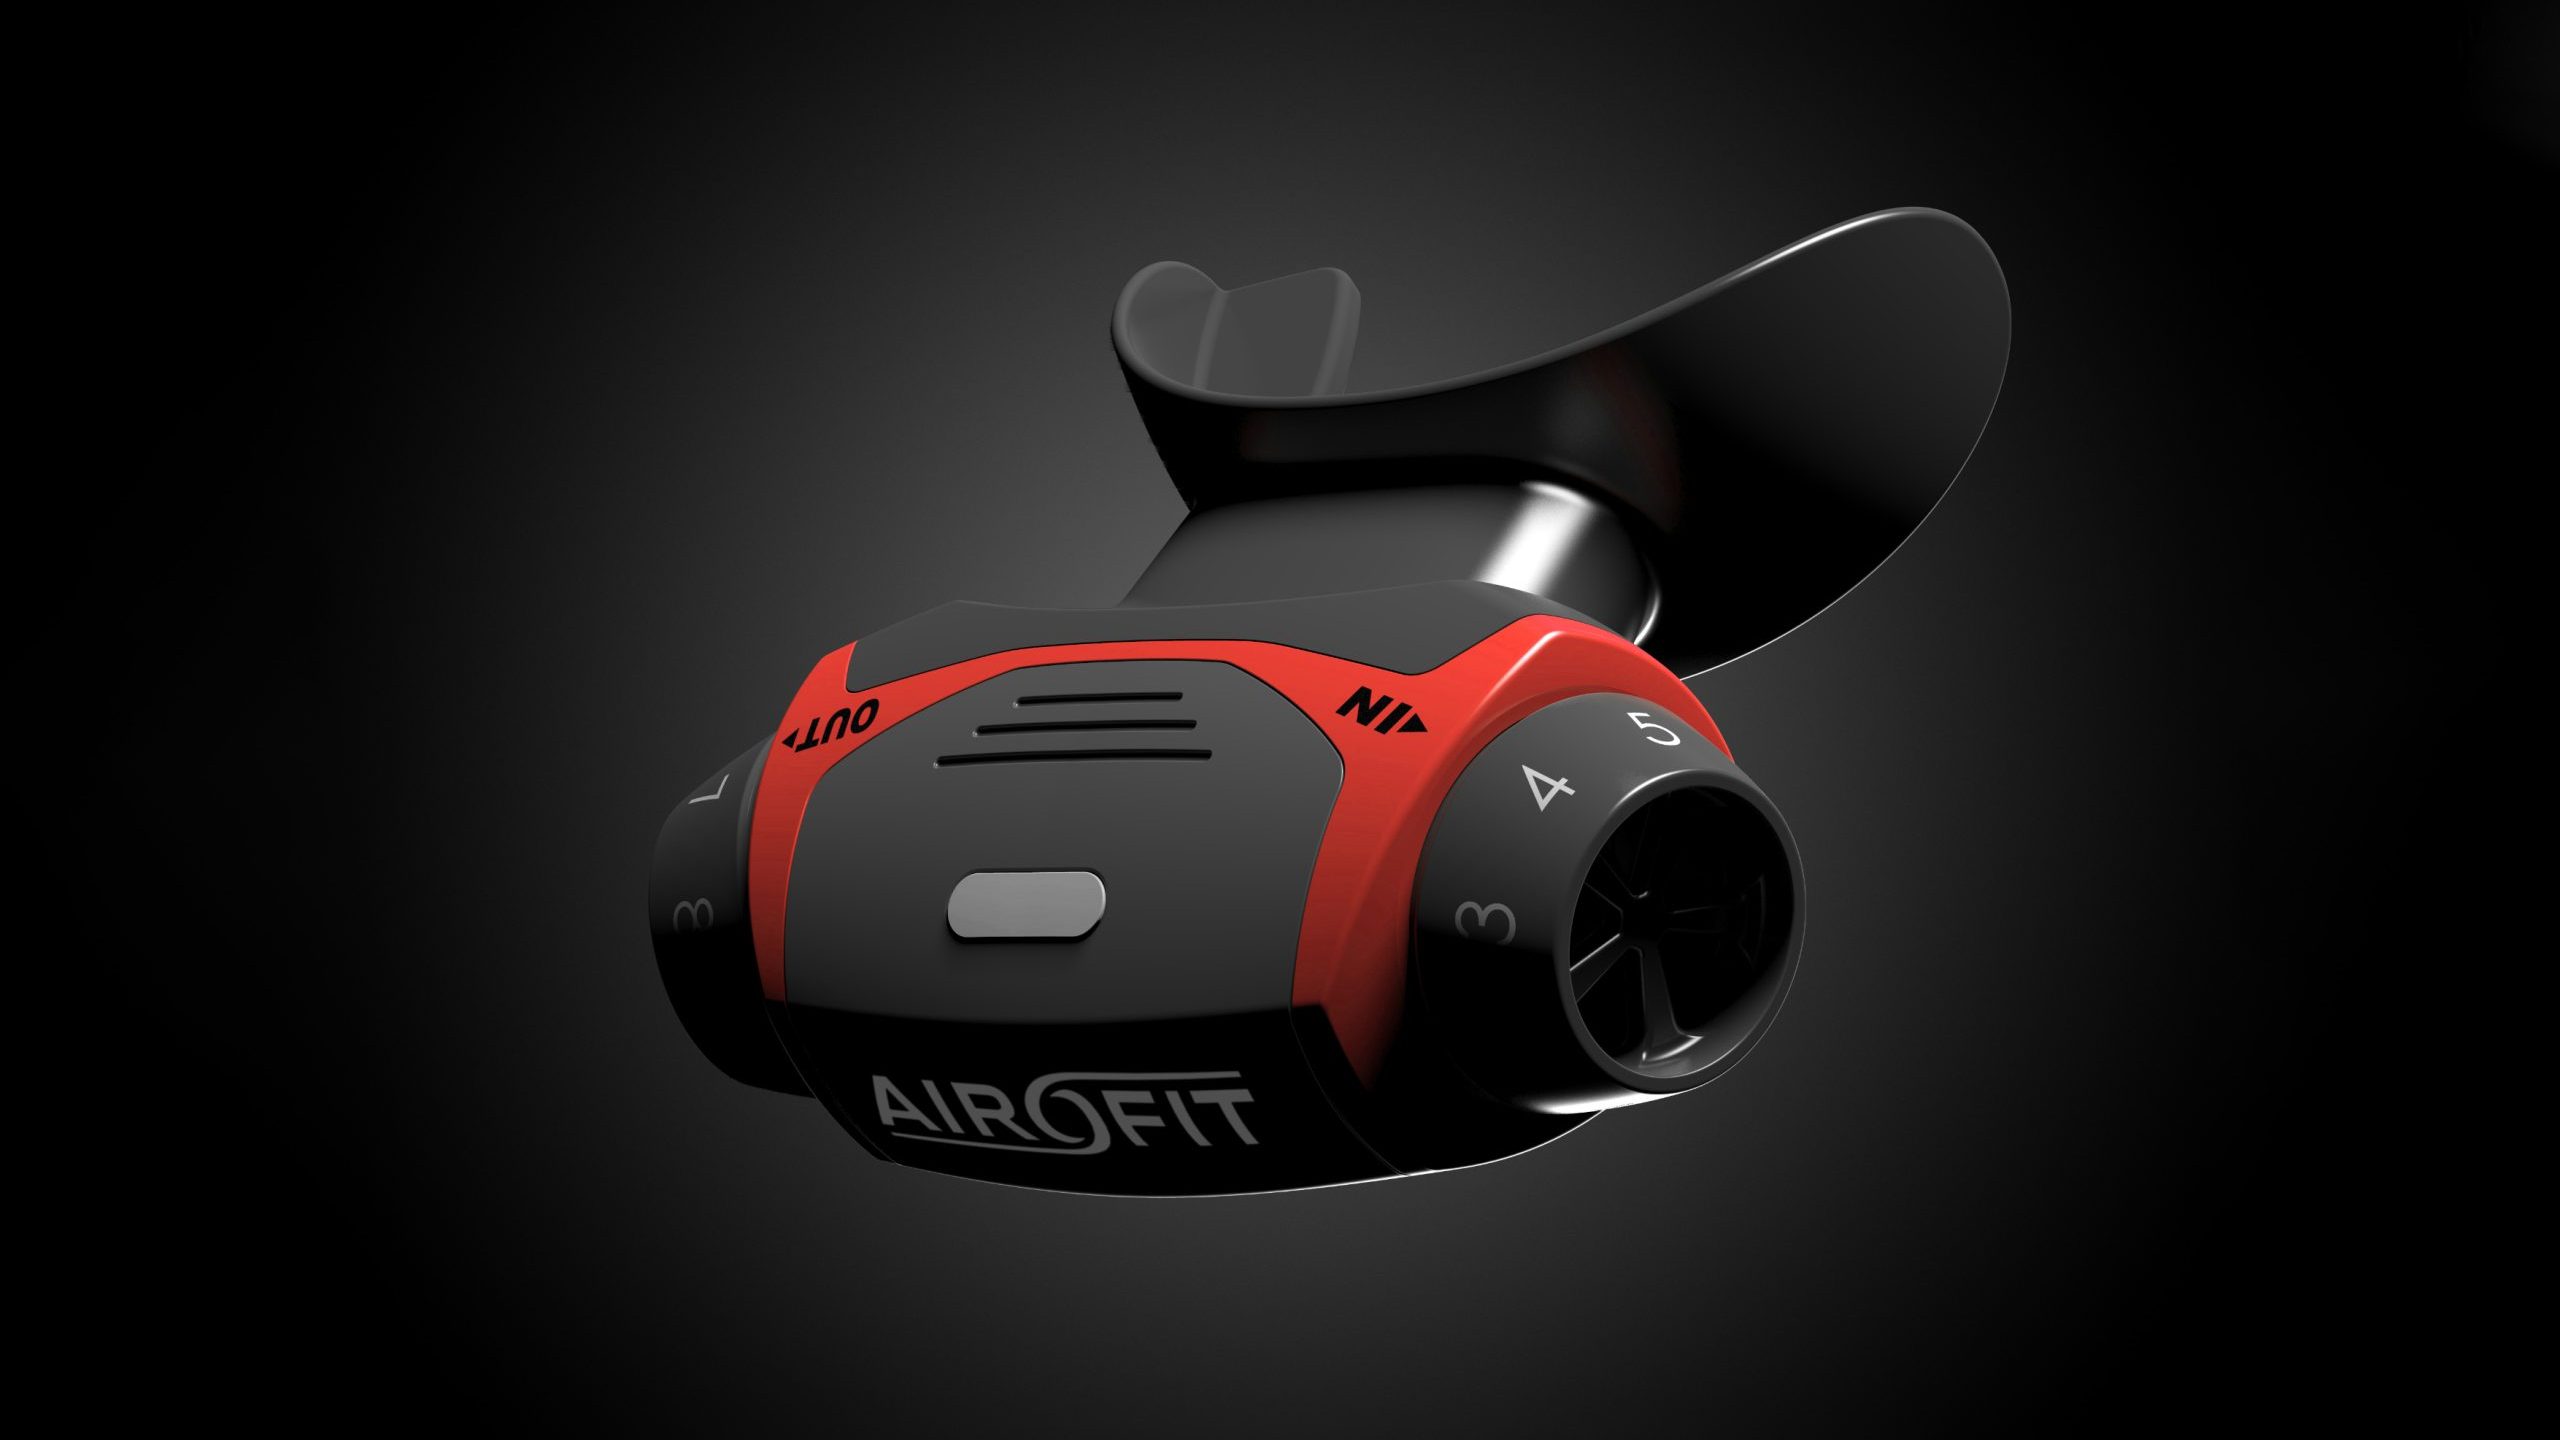 Airofit Smart breathing trainer red and black design scaled photo